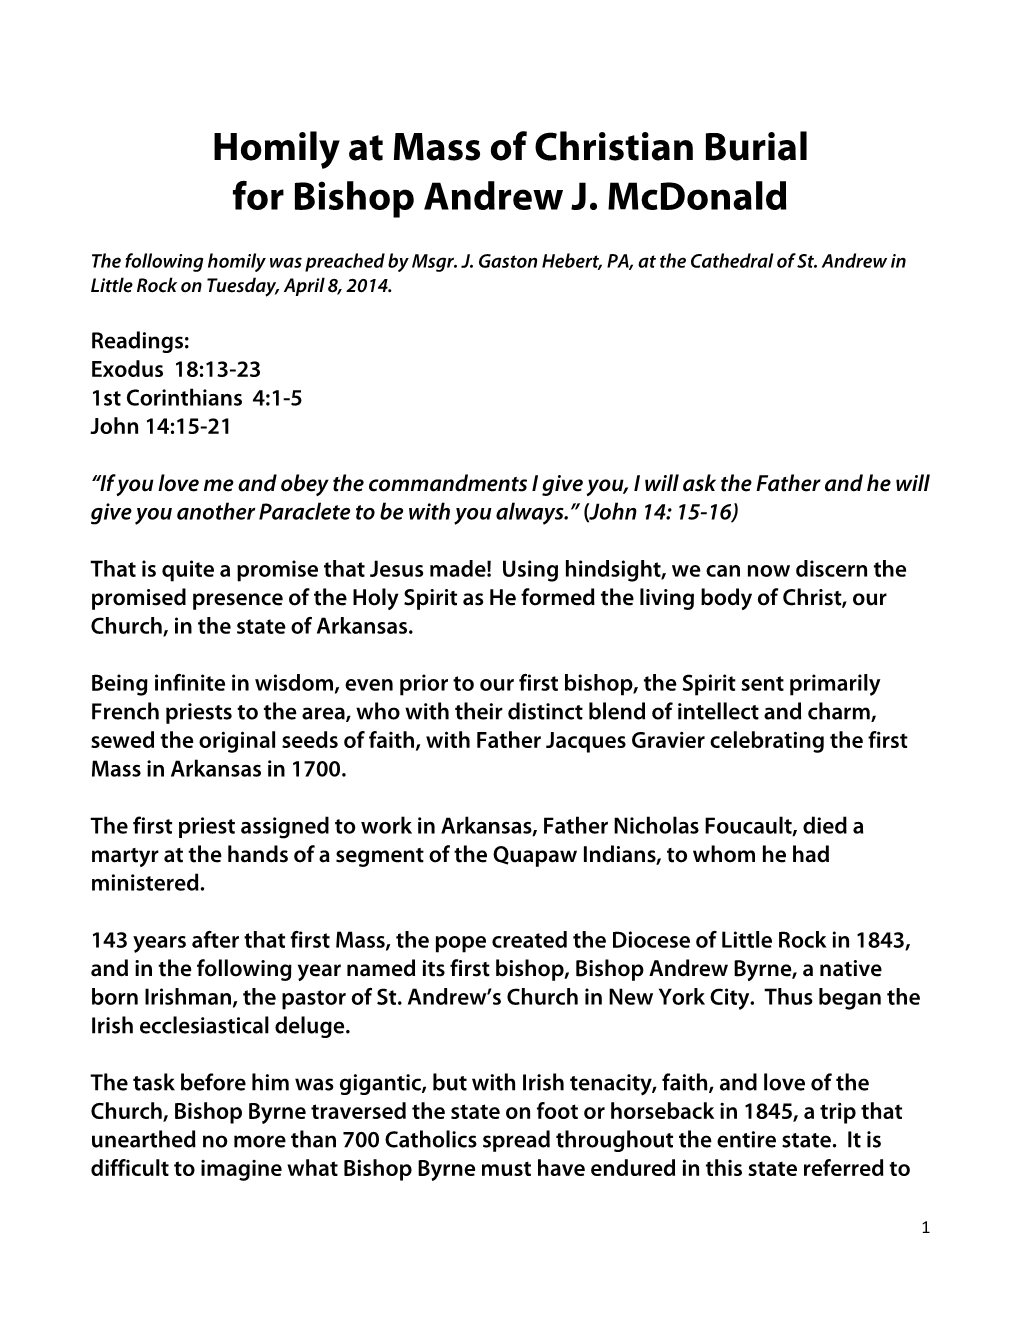 Homily at Mass of Christian Burial for Bishop Andrew J. Mcdonald